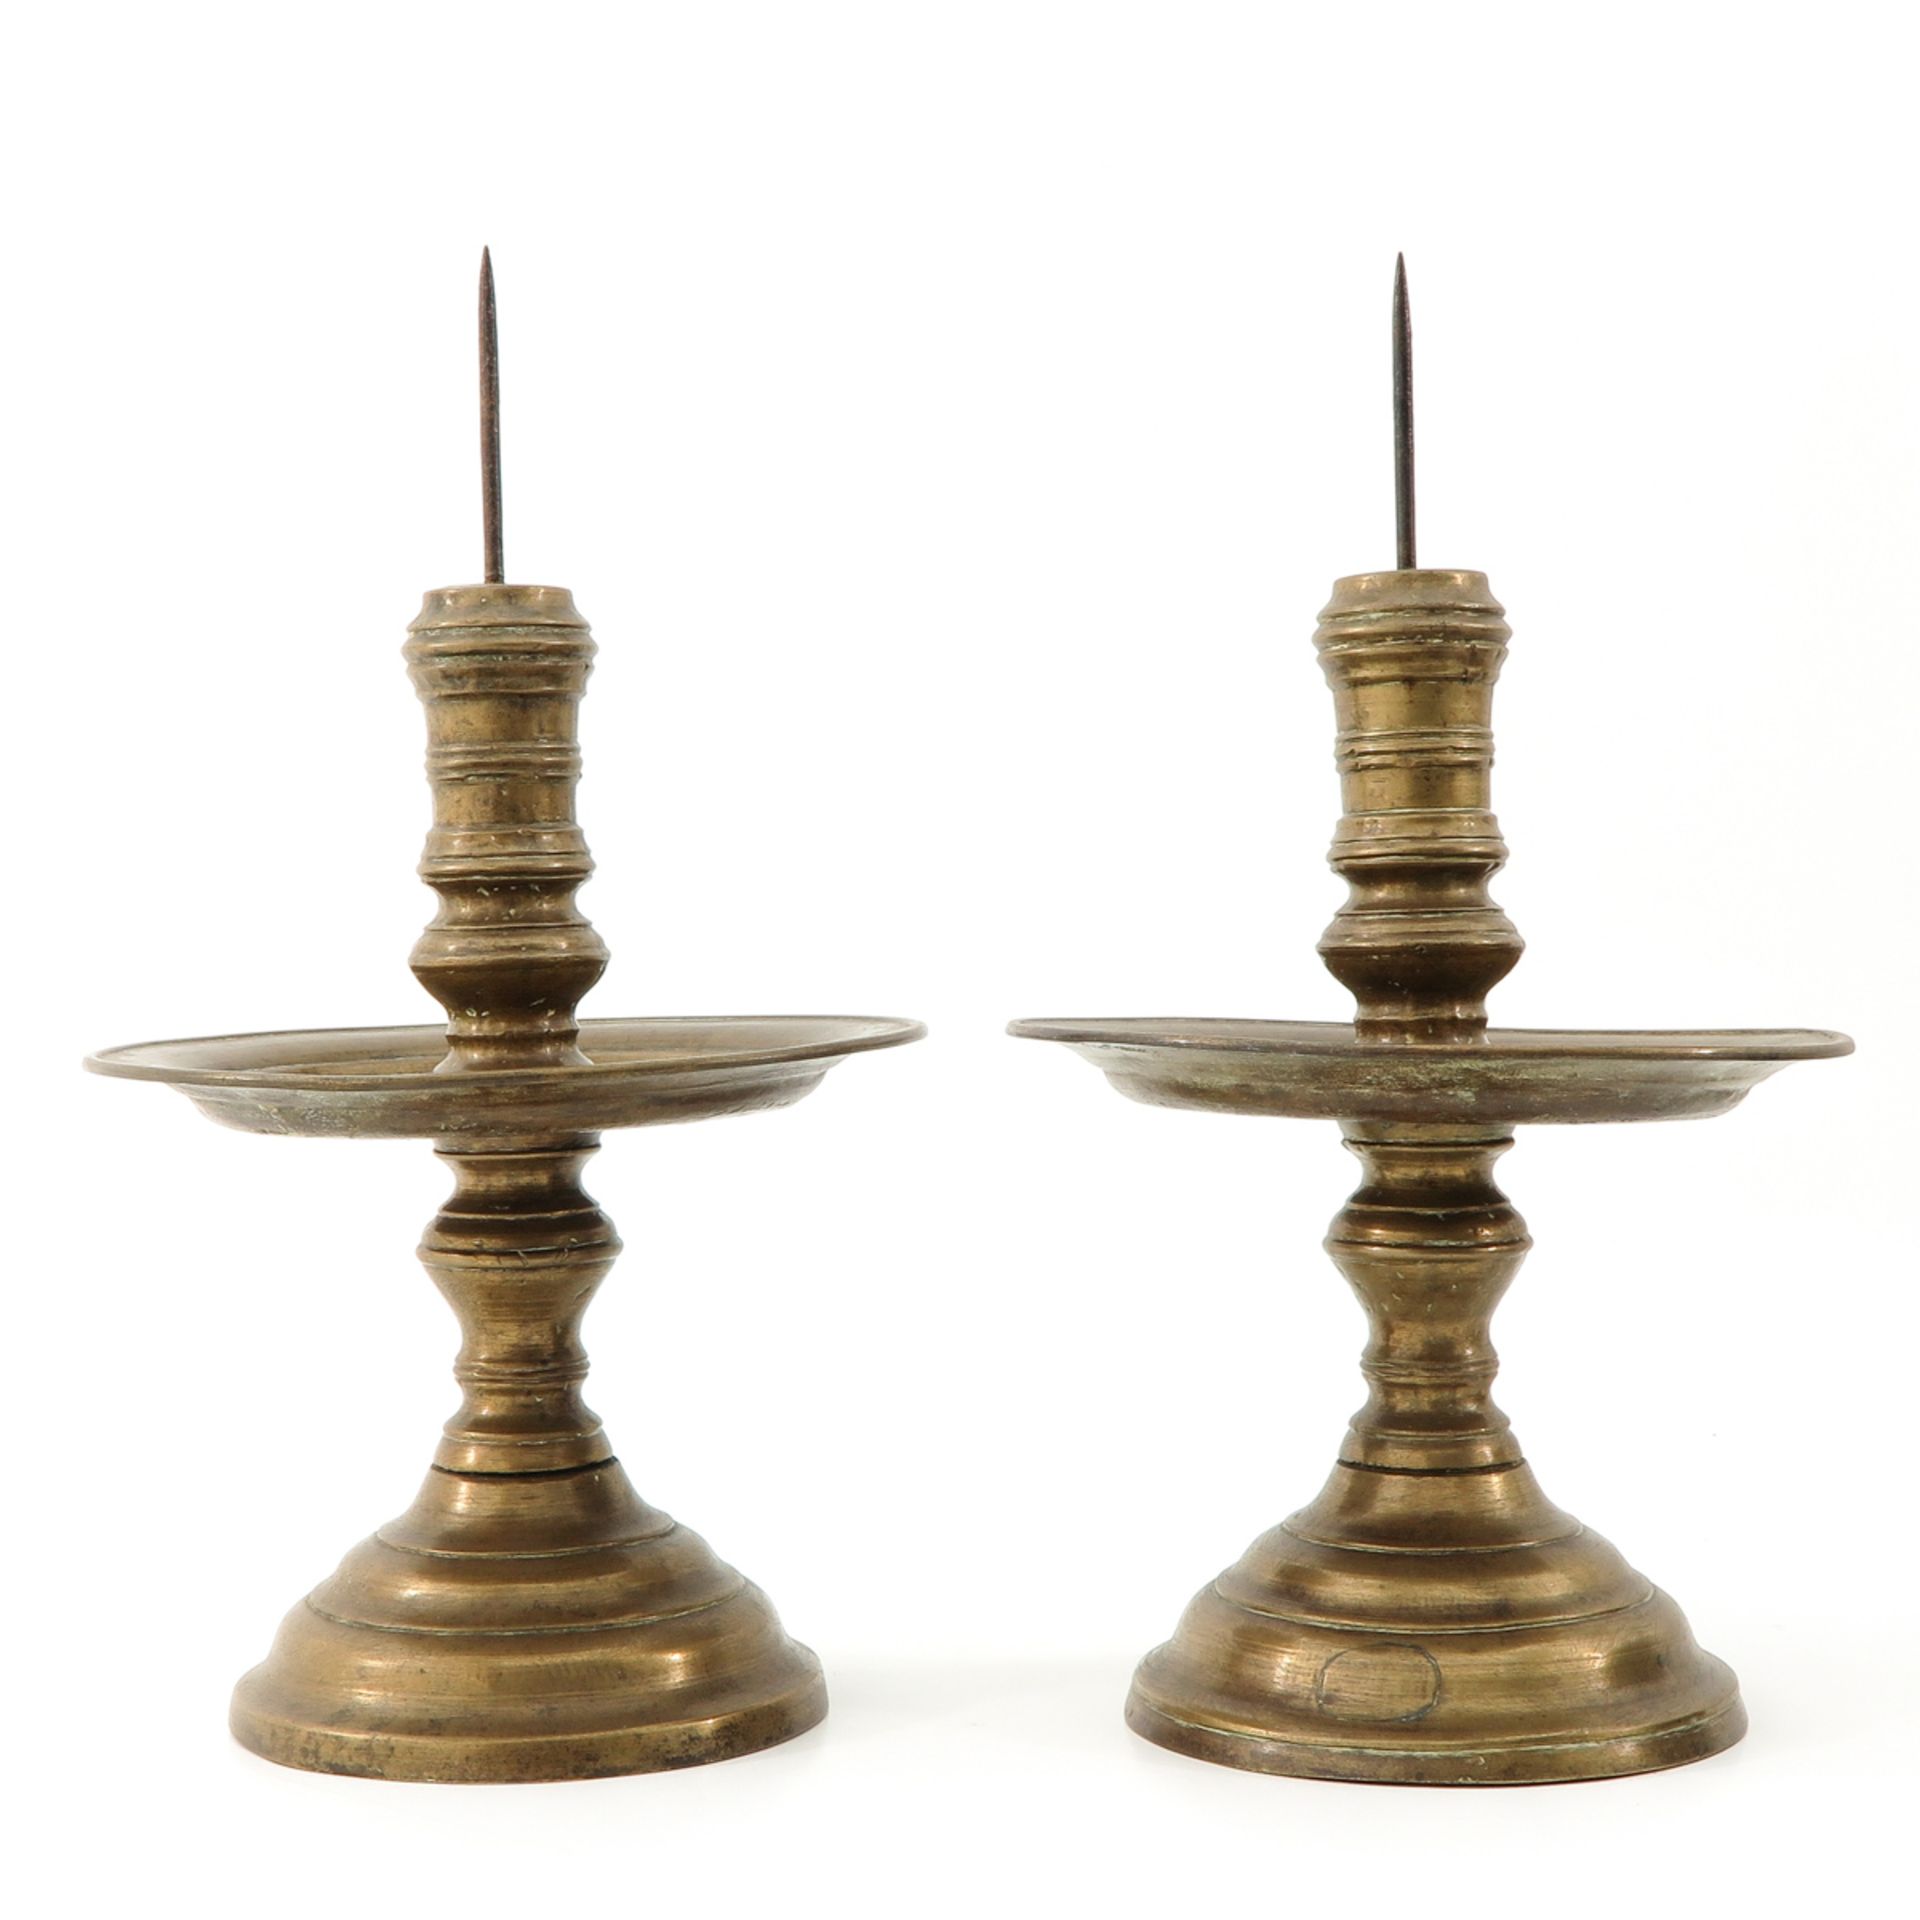 A Pair of Antique Brass Candlesticks - Image 3 of 7